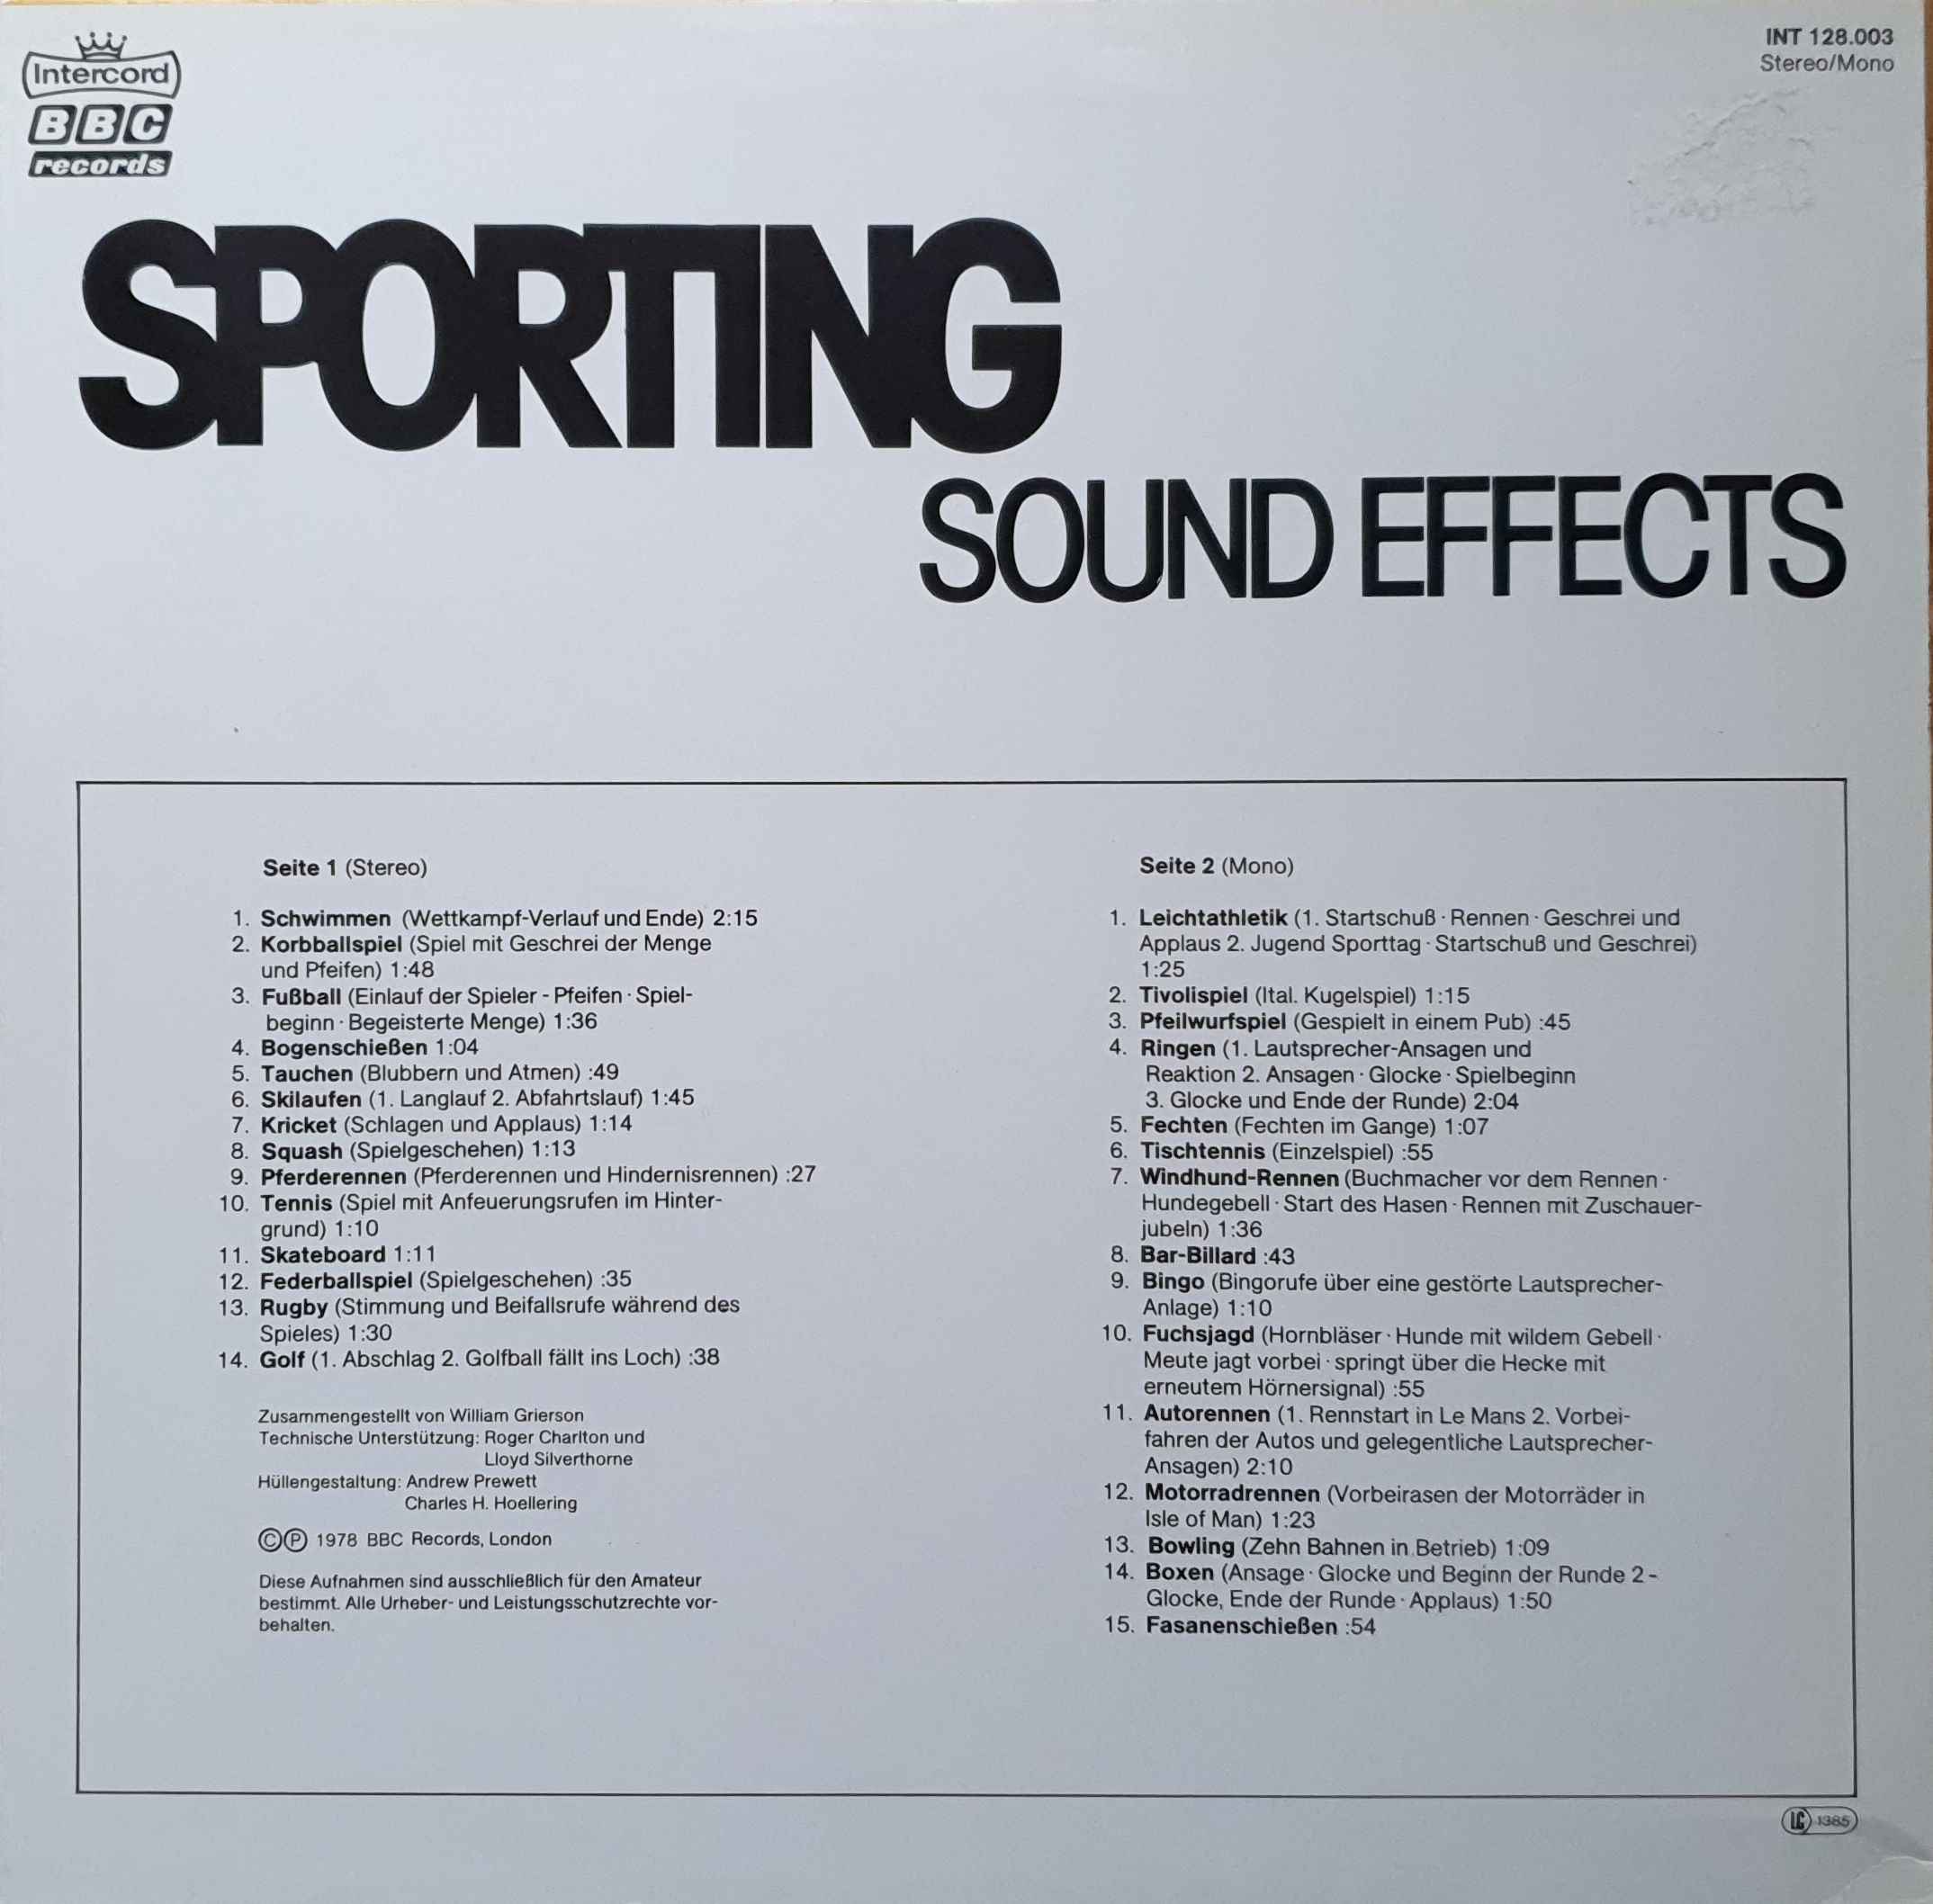 Picture of INT 128.003 Sporting Sound Effects by artist Various from the BBC records and Tapes library